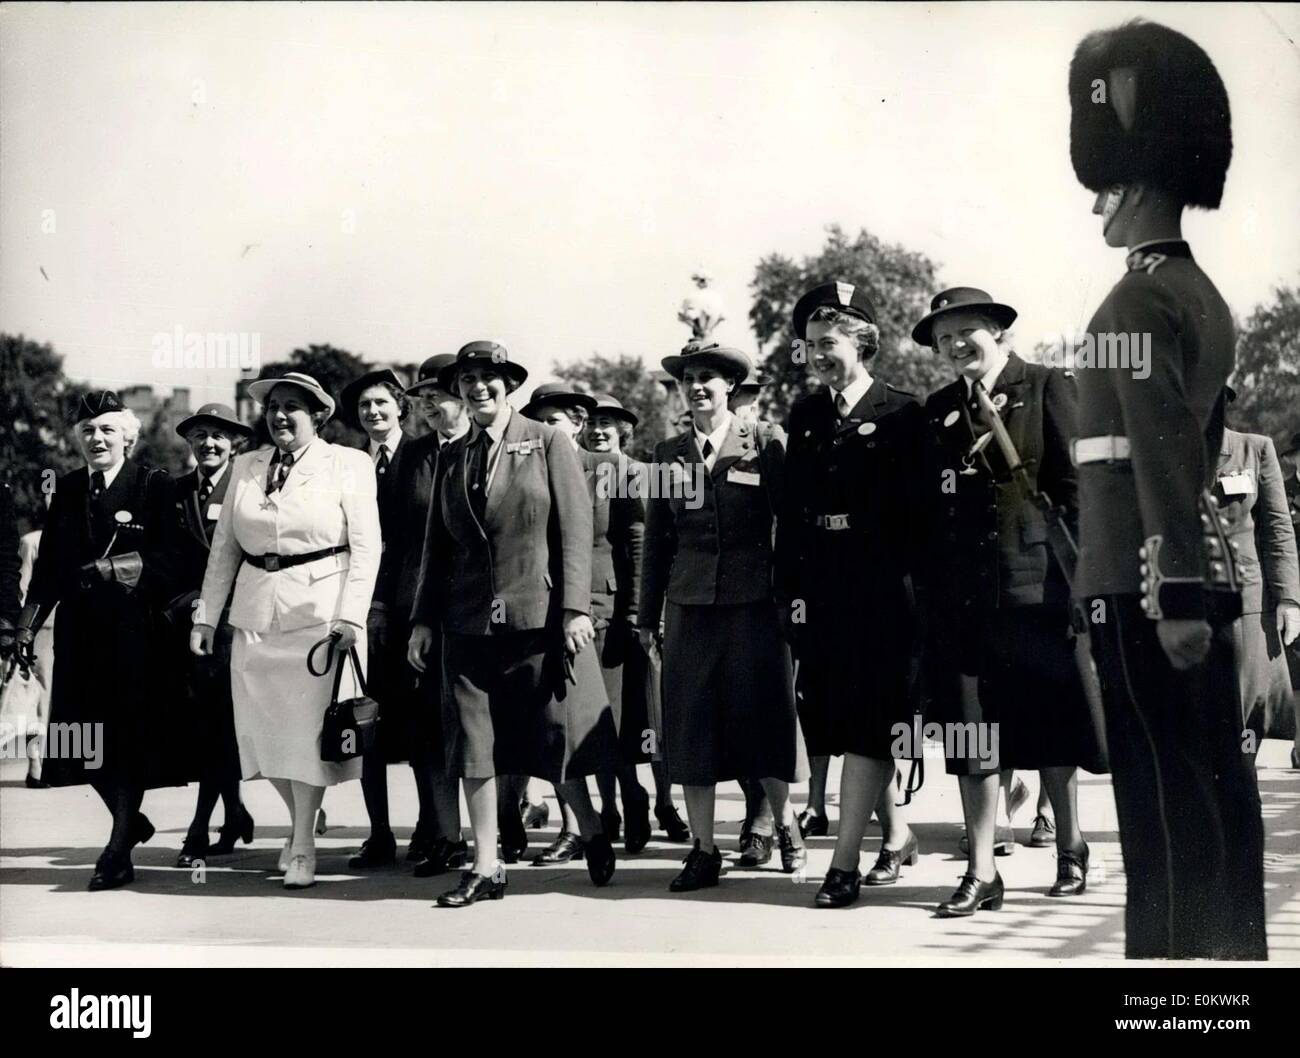 Jul. 27, 1950 - Queen Gives Party to Delegates to the World Conference of Girl Guides - at Buckingham Palace.: H.M. The Queen this afternoon gave a party to delegates to the World Conference of Girl Guides and Girl Scouts, at Buckingham Palace, Photo shows Lady Baden-Powell and other officials of the World Conference, seen on arrival at Buckingham Palace. Stock Photo